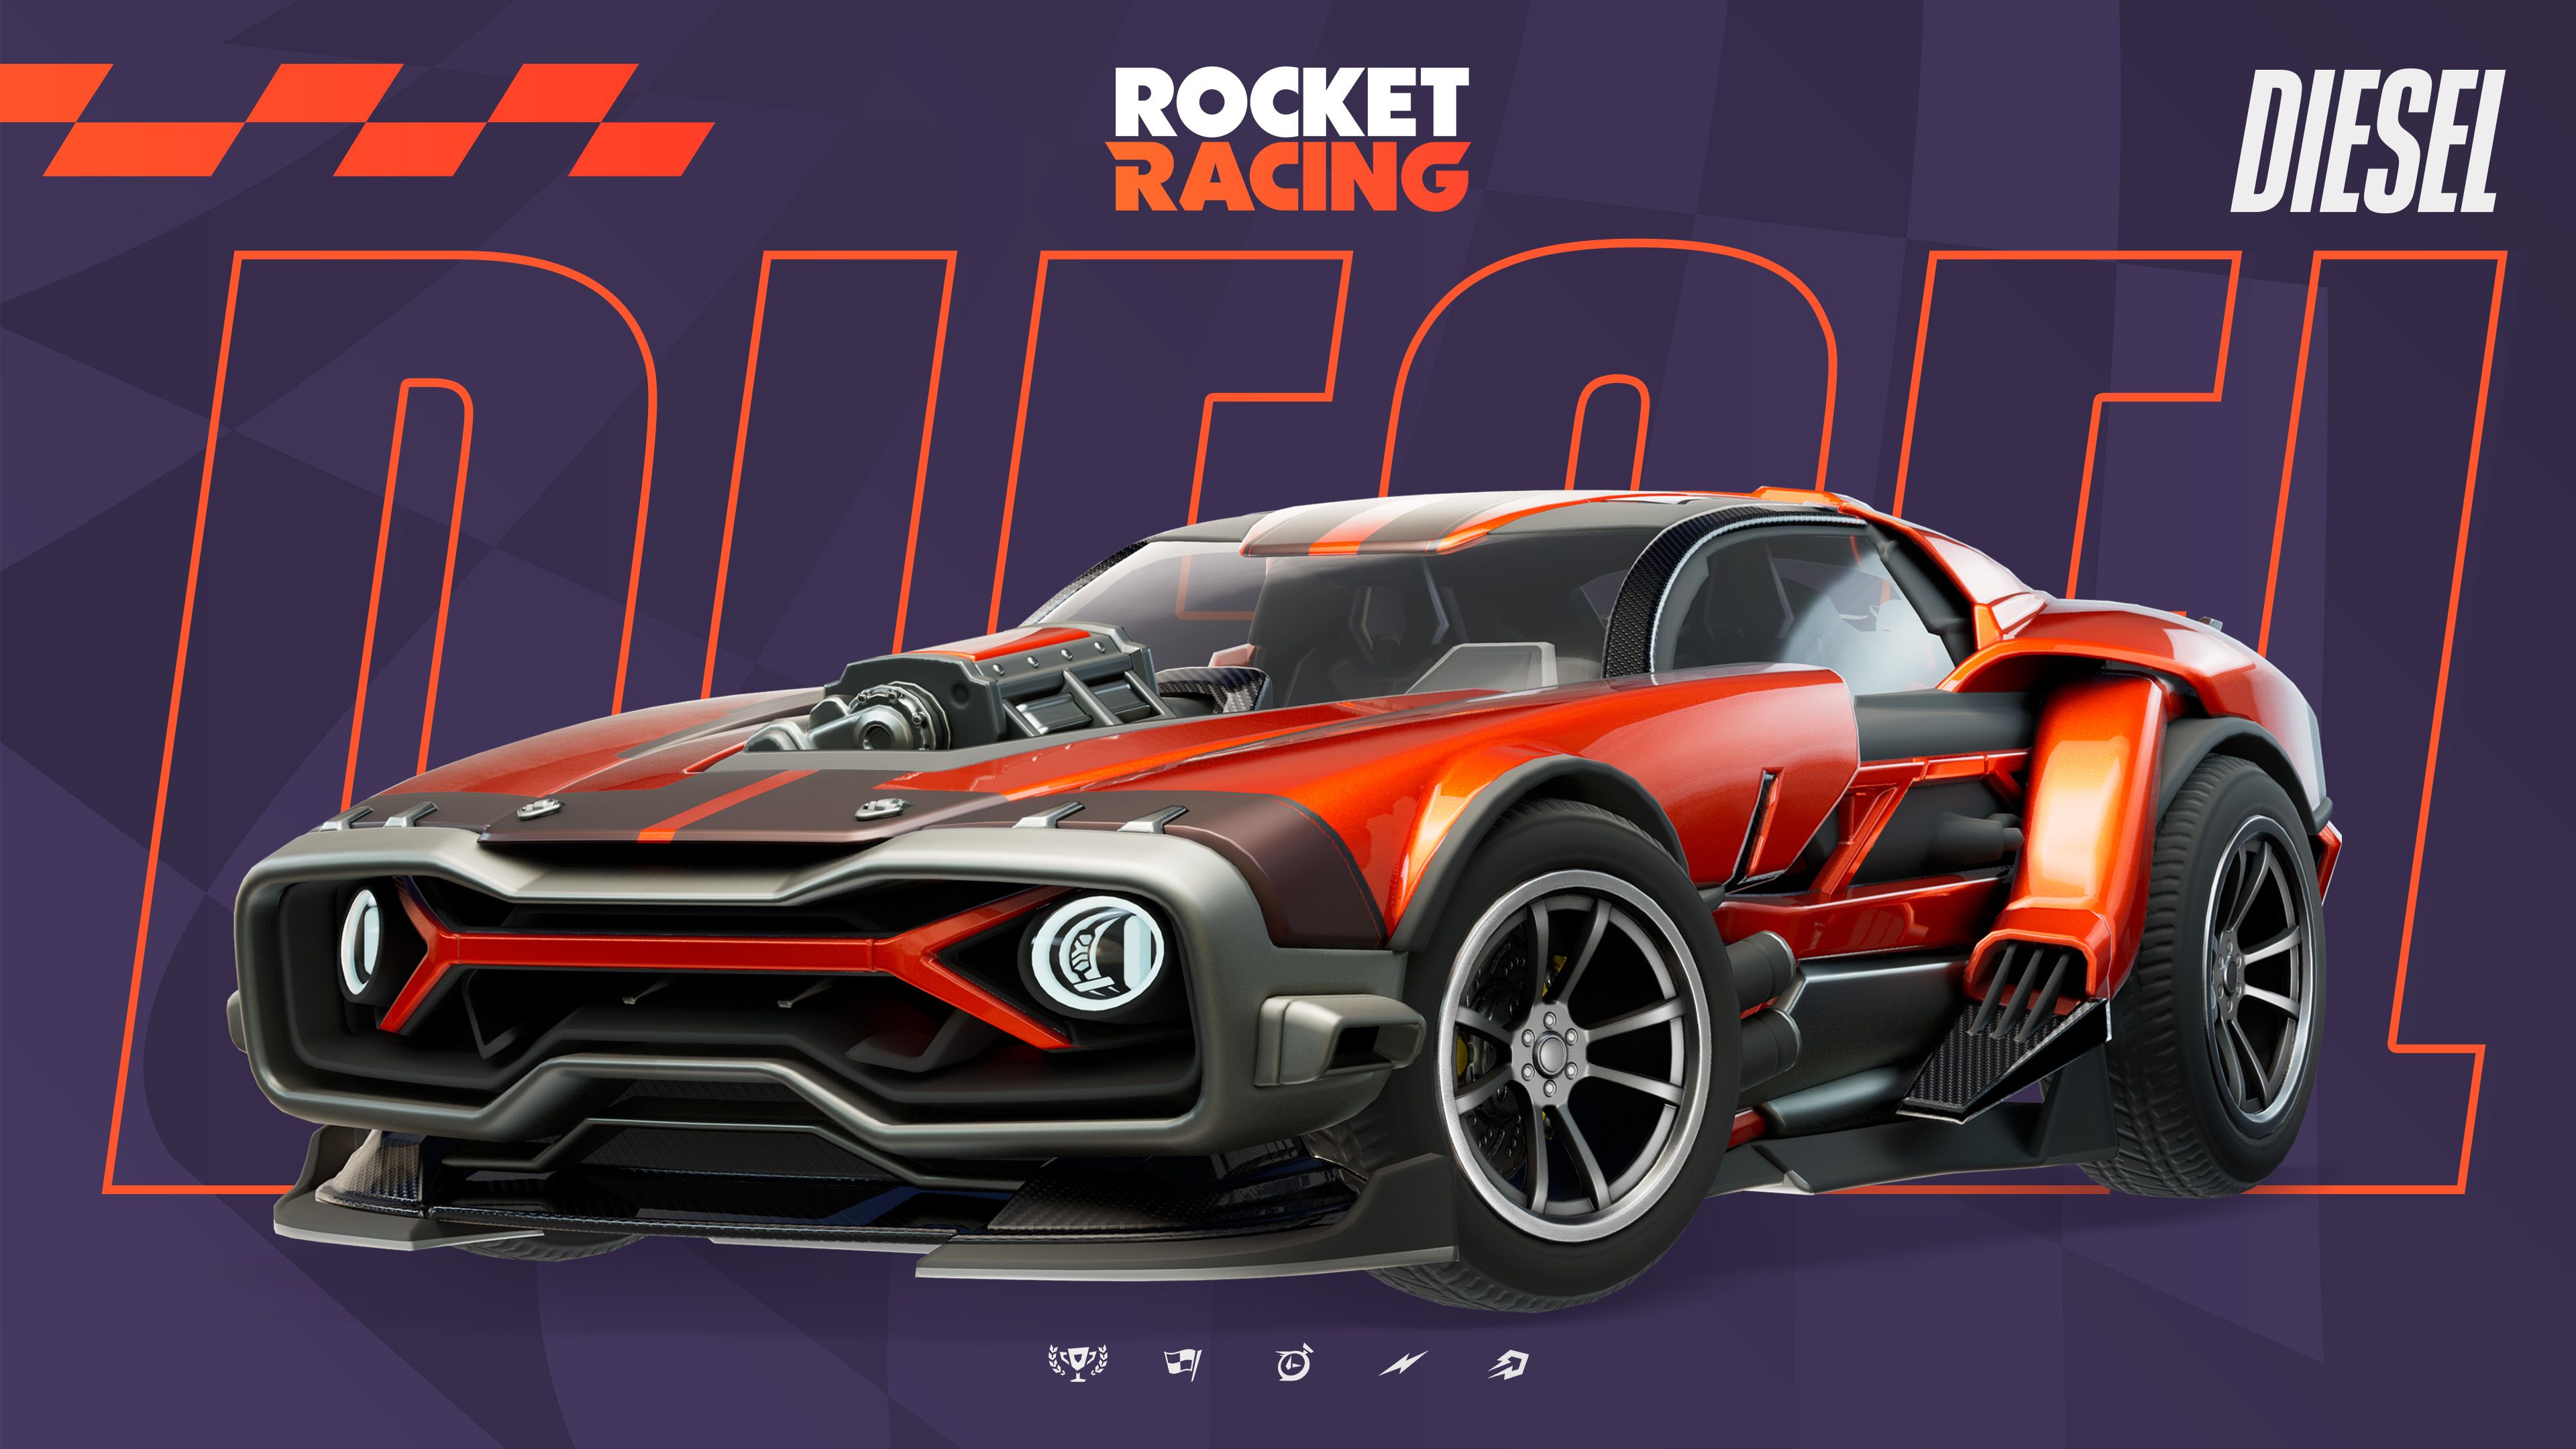 Rocket Racing comes to Fortnite: this is the new Rocket League